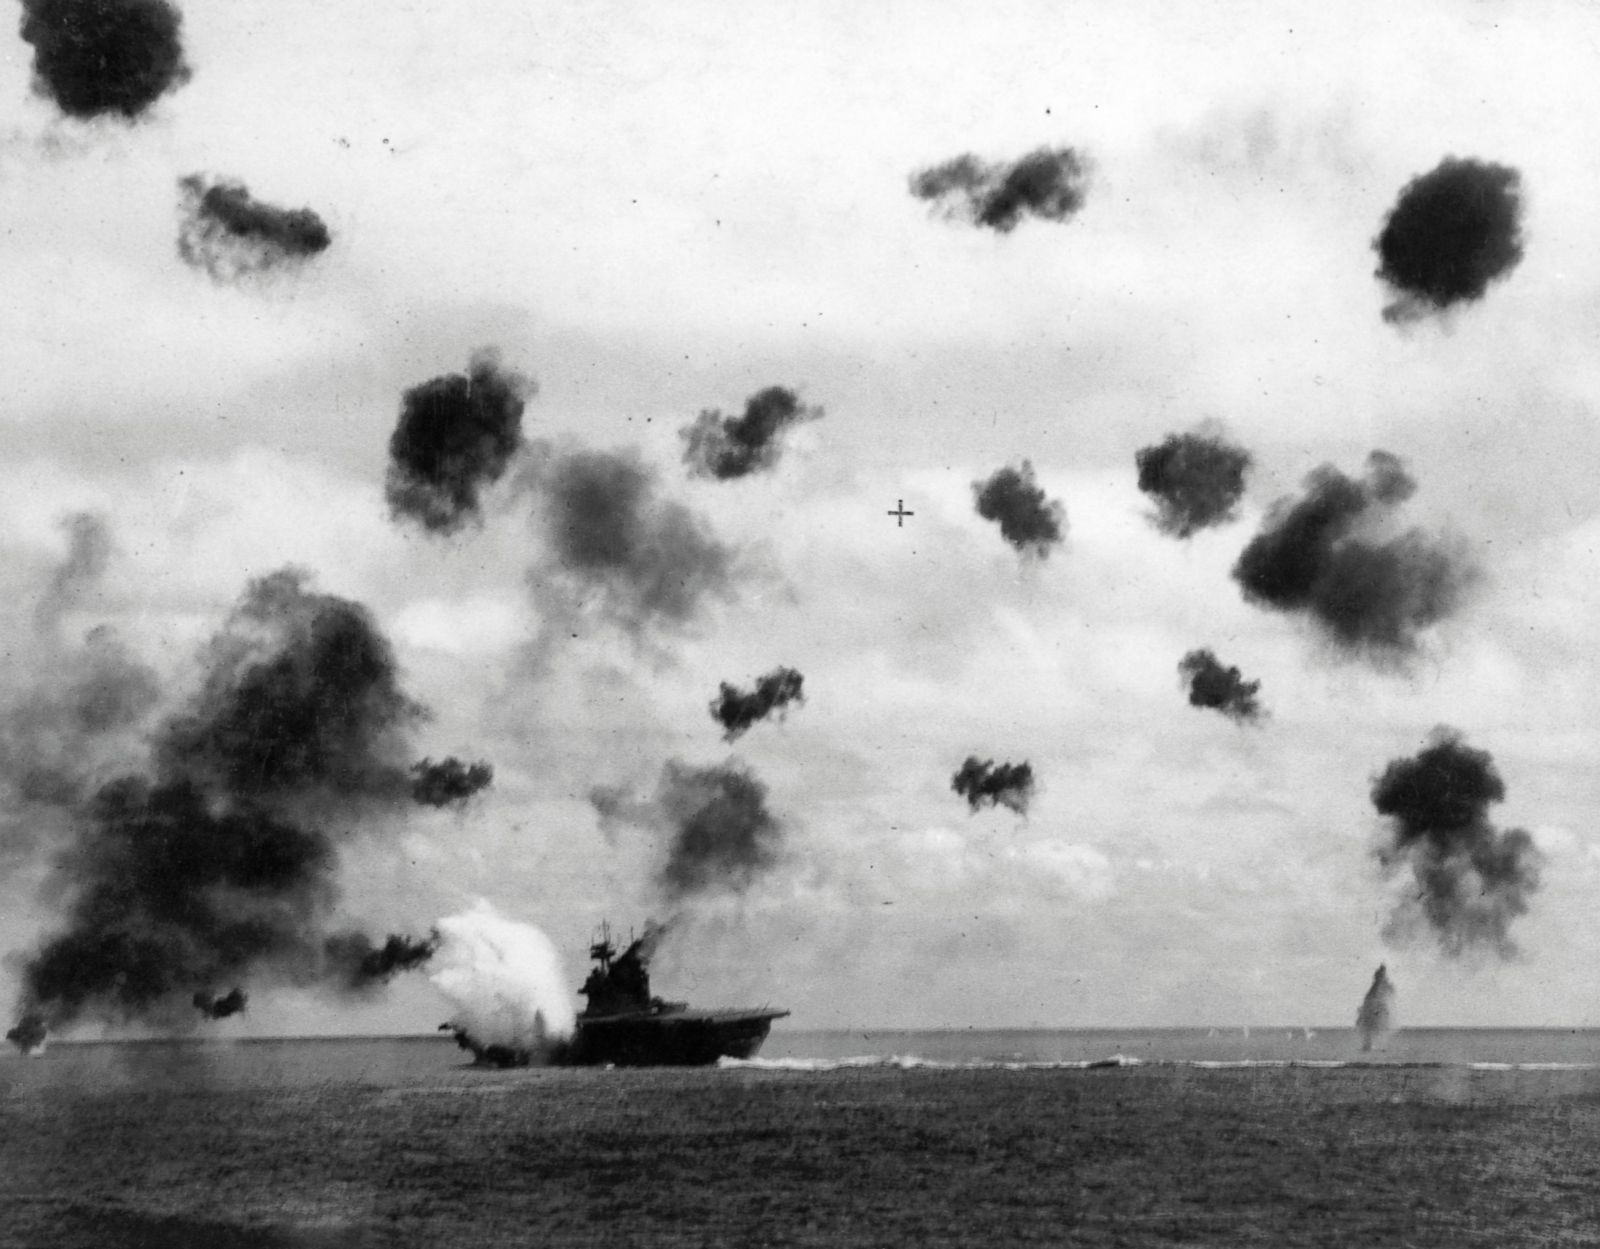 75th anniversary of the Battle of Midway Photos - ABC News